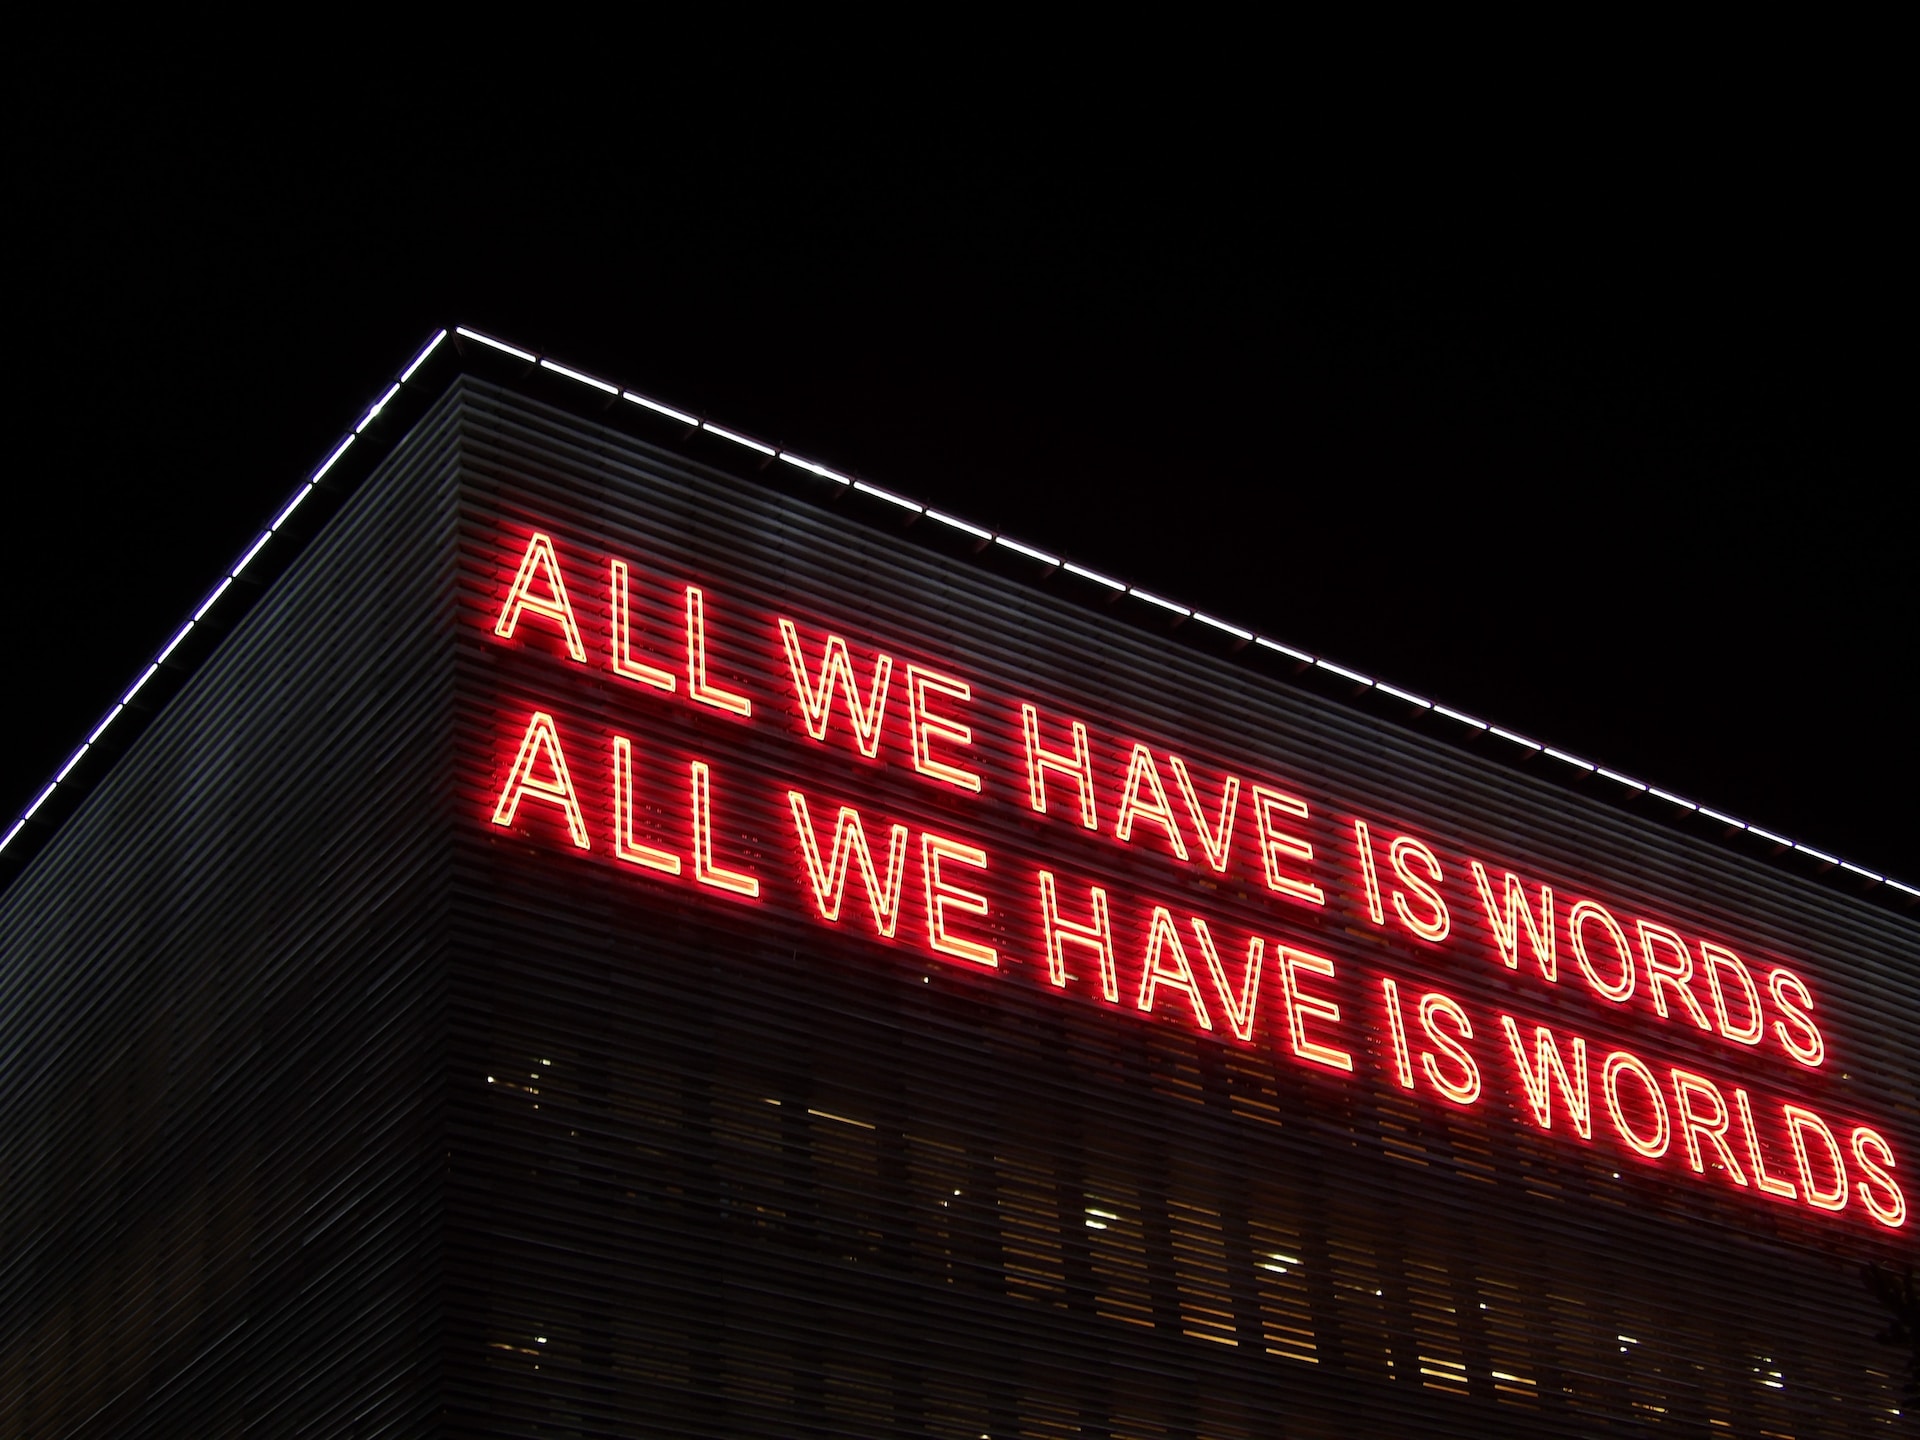 Large Neon Sign on Building says "All We Have is Words" twice